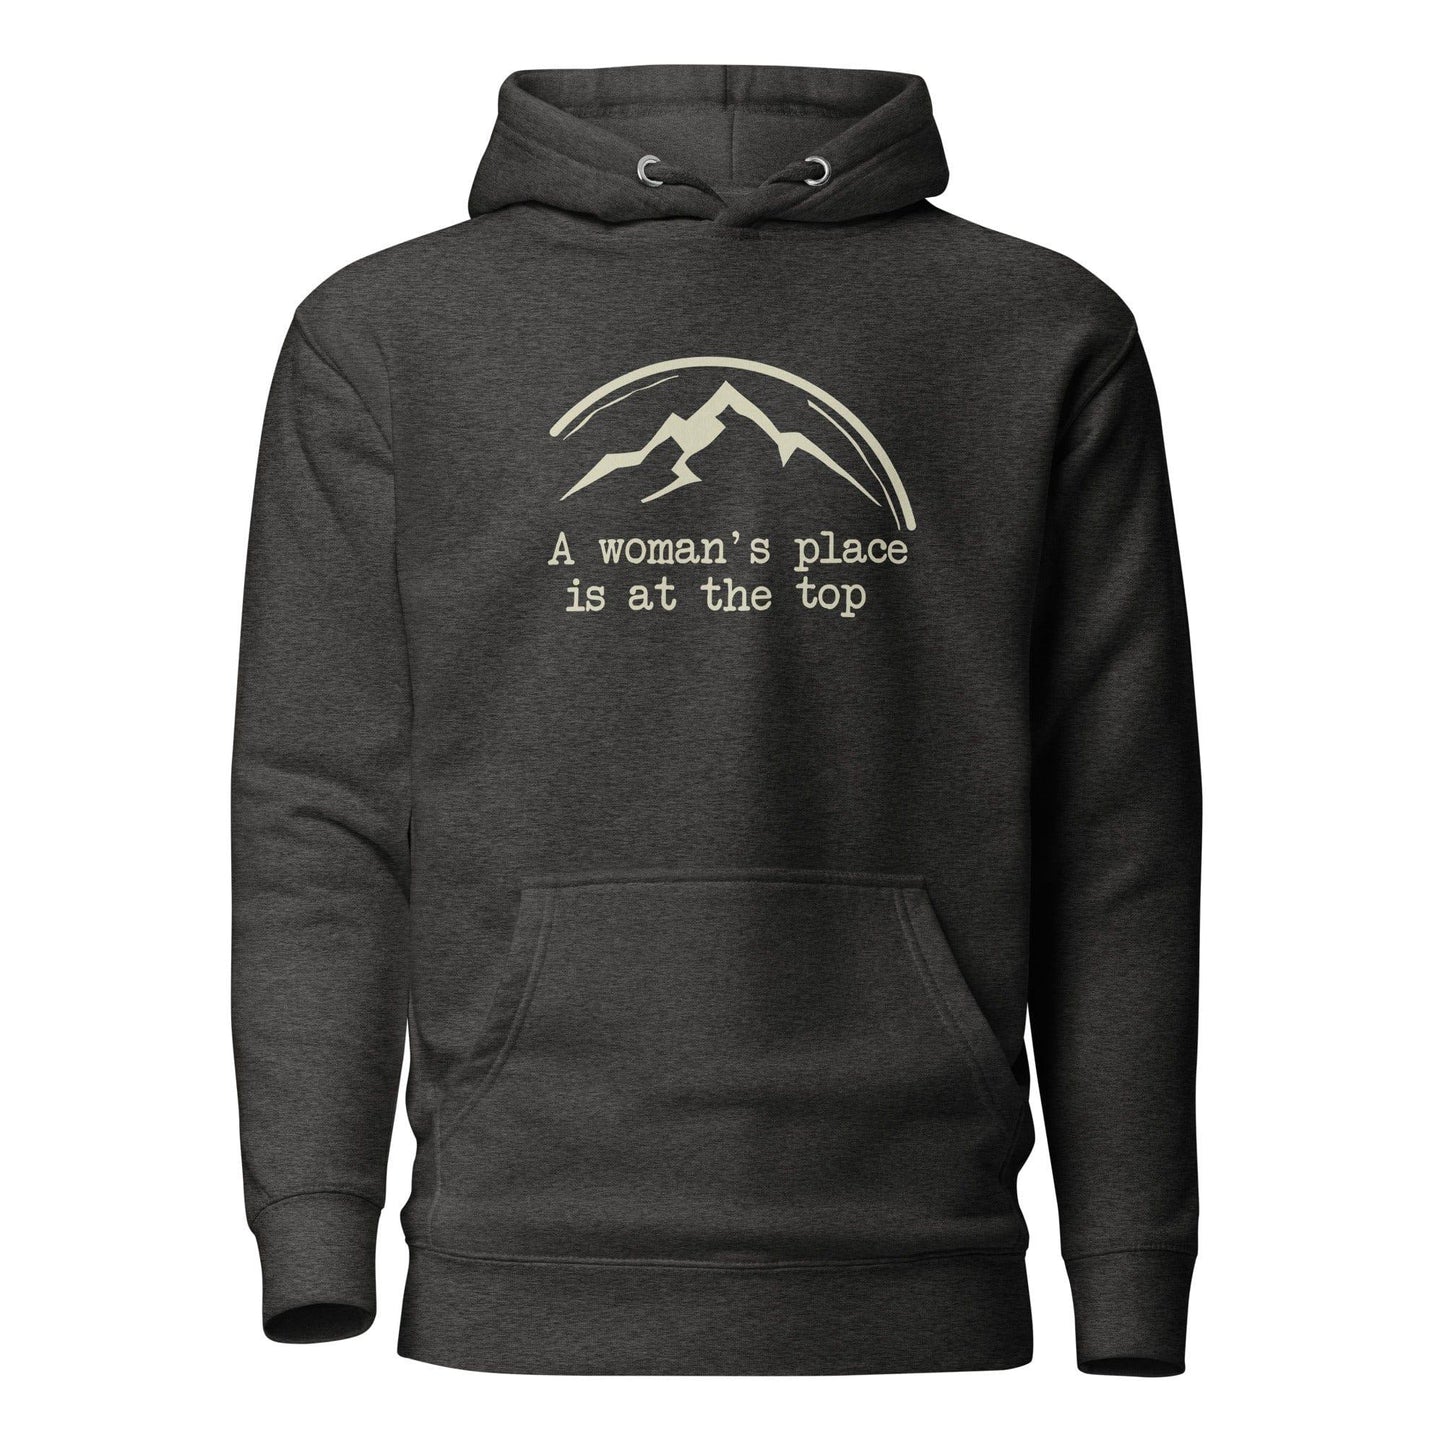 A Woman's Place Is At The Top Hoodie - Adventure Threads Company